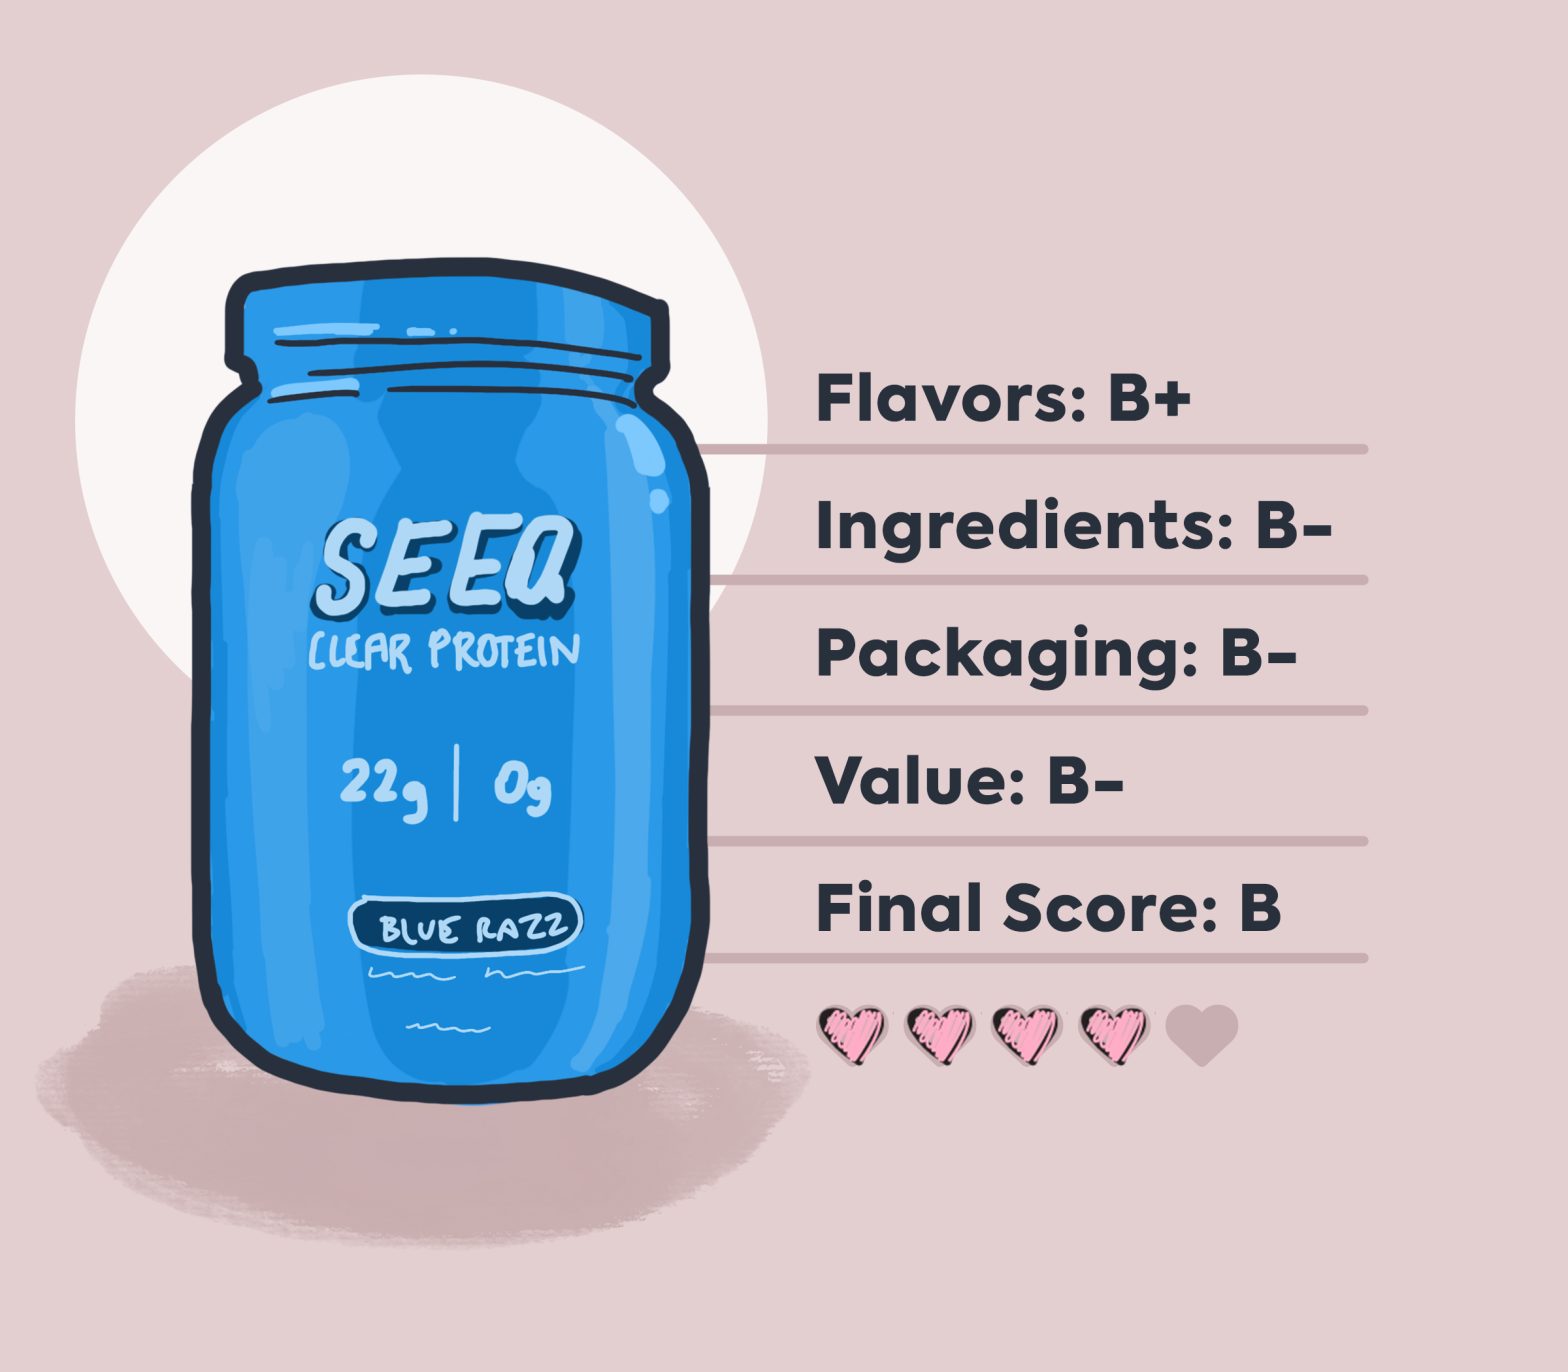 Seeq clear protein